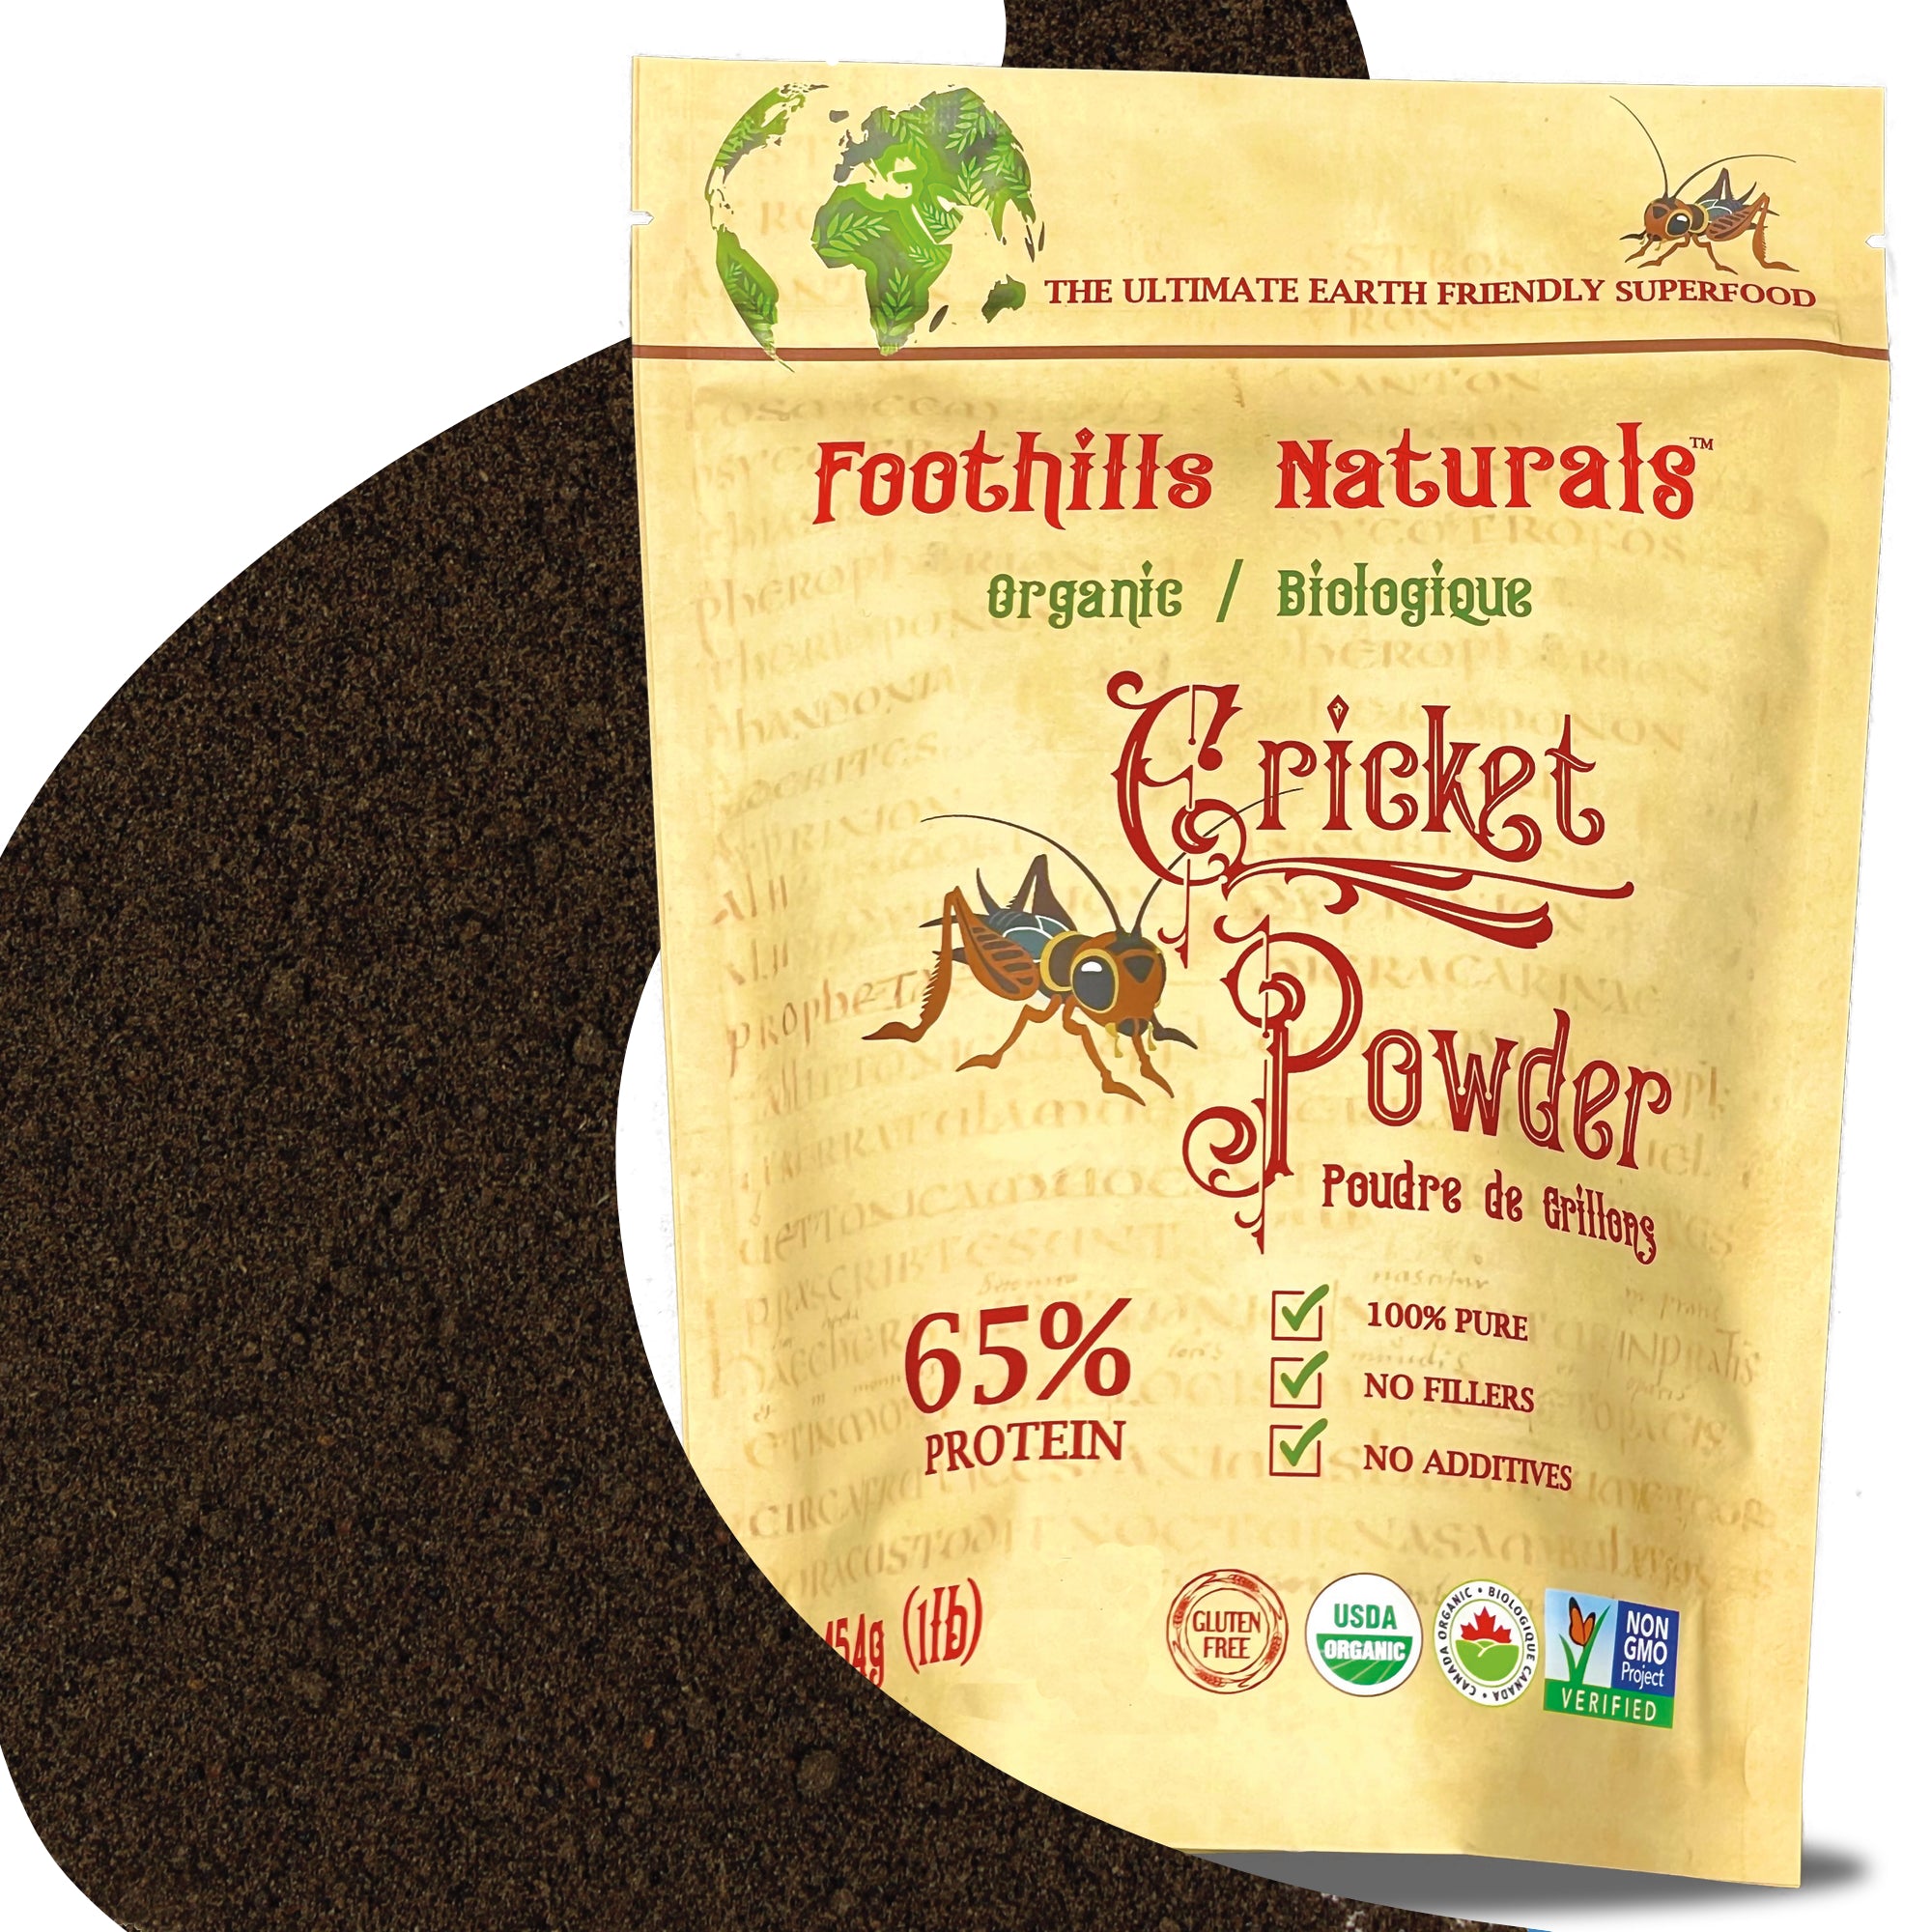 Cricket Powder High Protein Content Organic - Pure, Keto, Paleo Sustainable Superfood